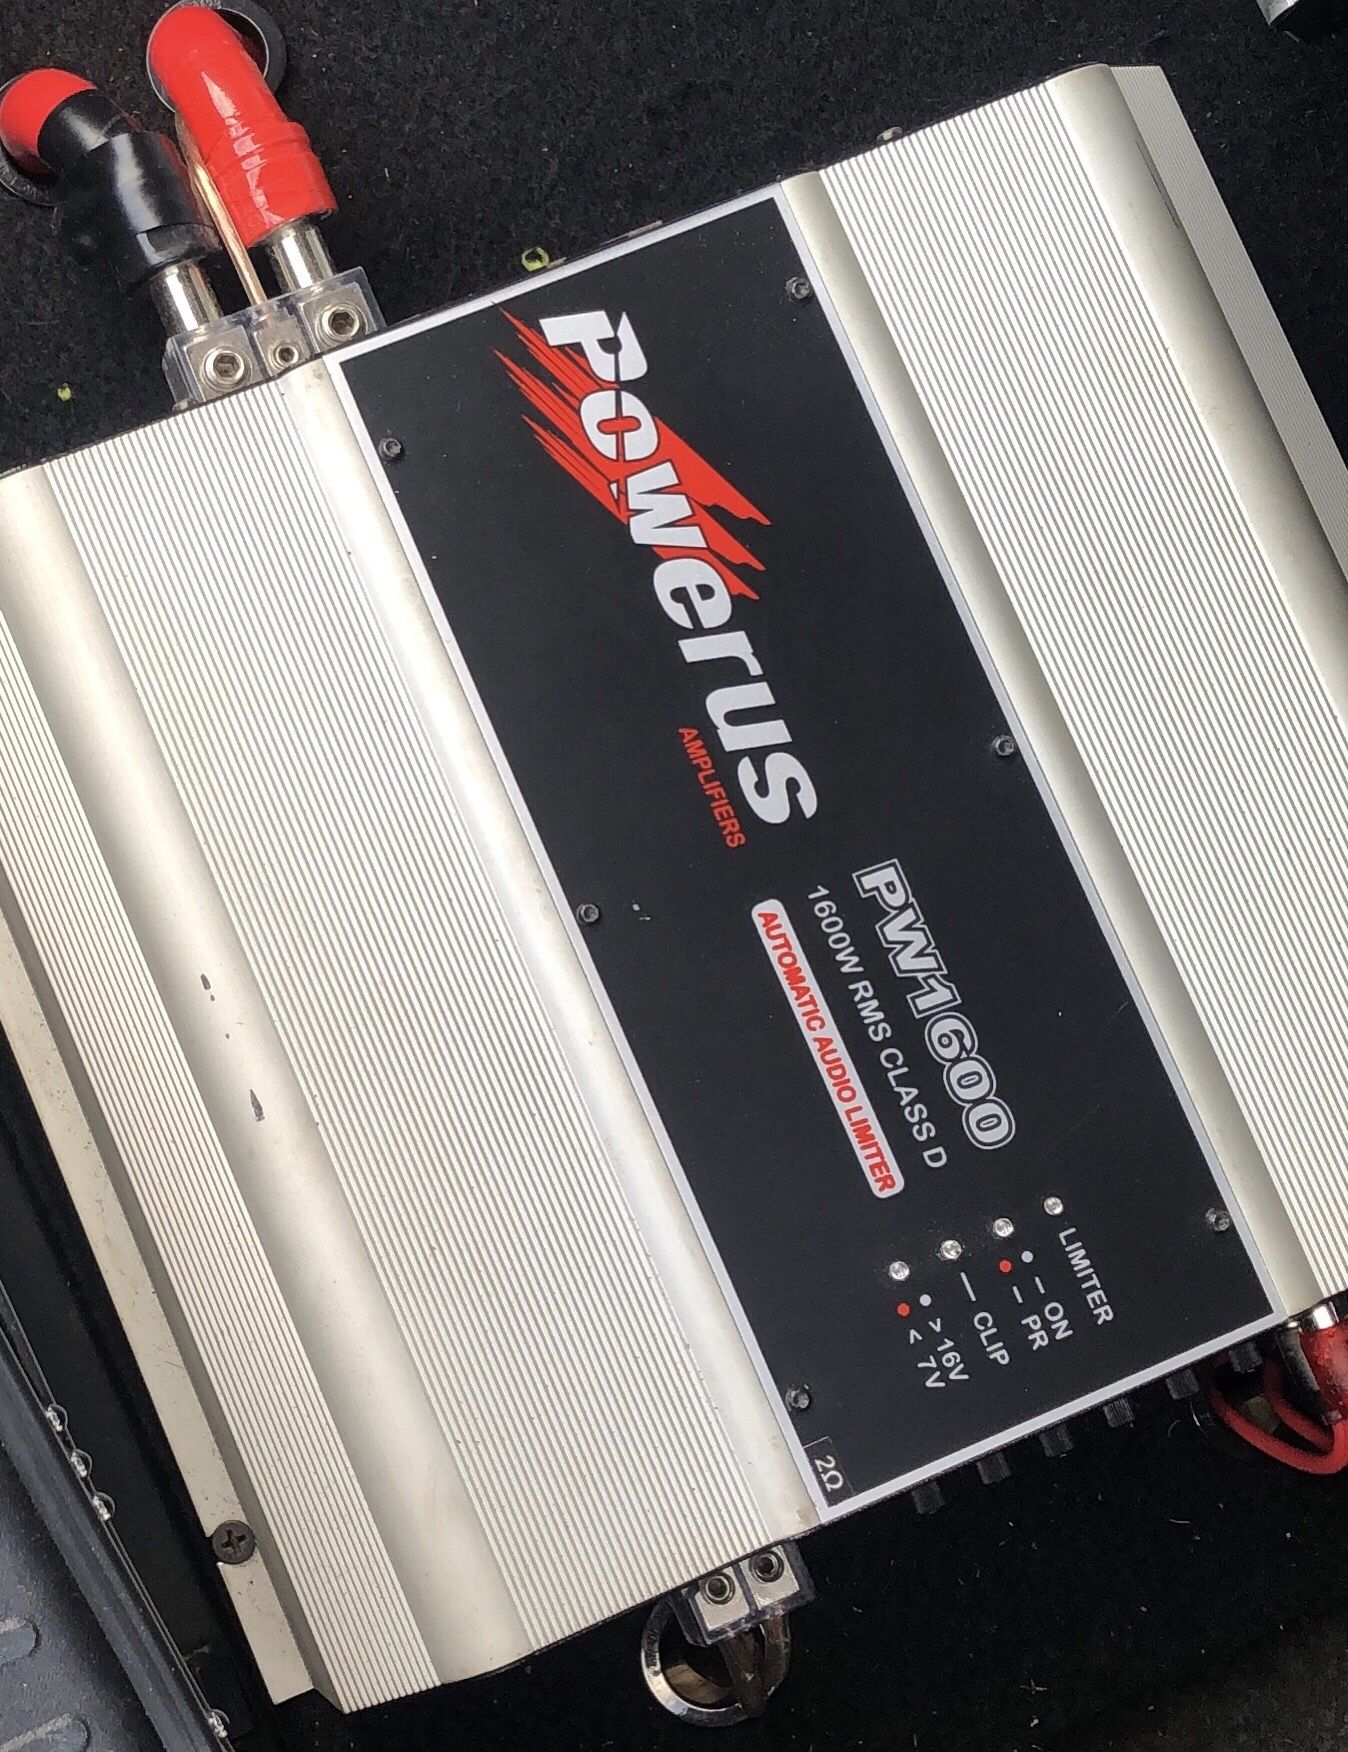 PowerUs Car Audio Amplifier 1600 watts rms ( The Most Powerfull )